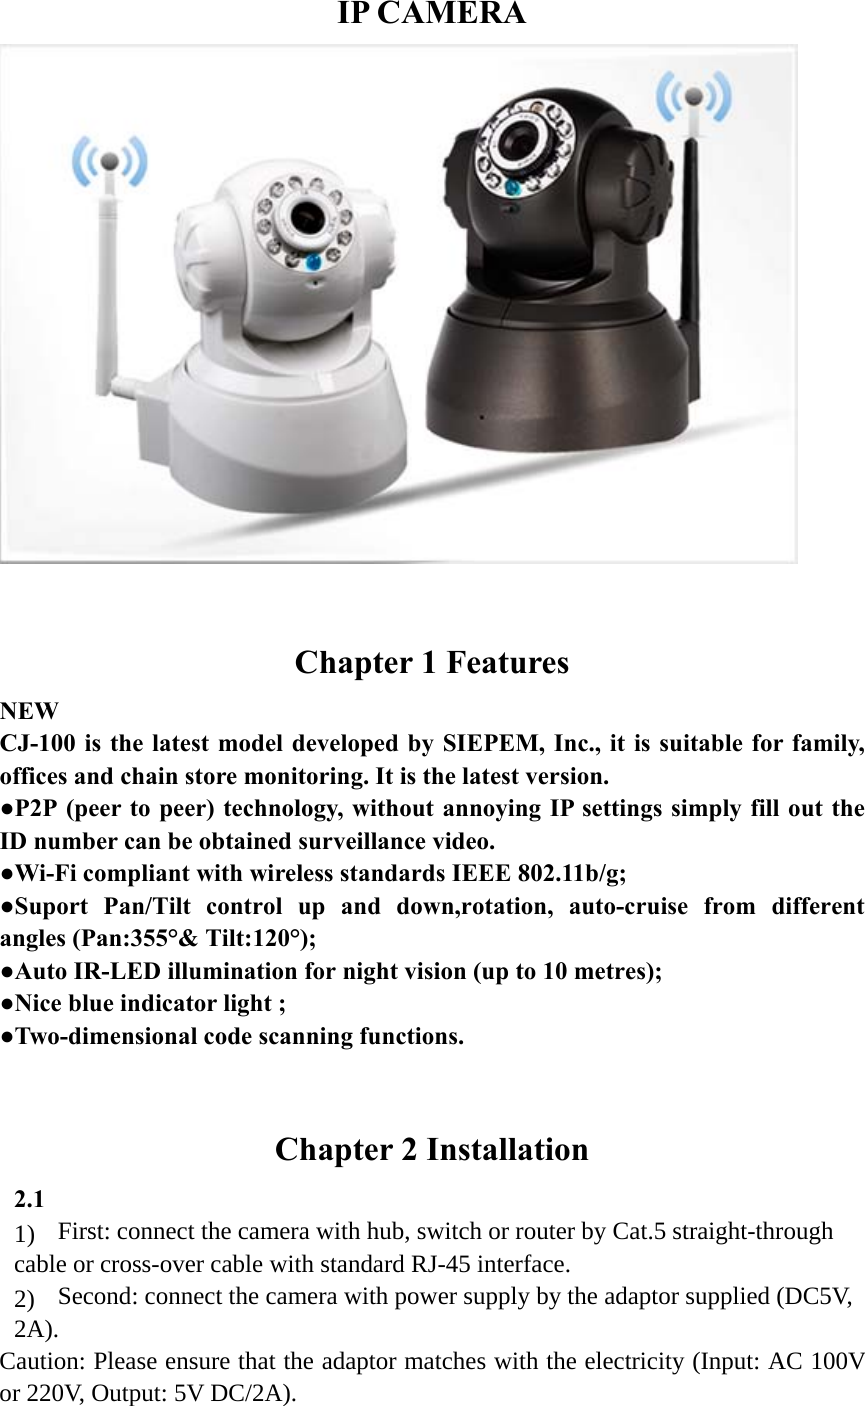   IP CAMERA   Chapter 1 Features NEW CJ-100 is the latest model developed by SIEPEM, Inc., it is suitable for family, offices and chain store monitoring. It is the latest version.   ●P2P (peer to peer) technology, without annoying IP settings simply fill out the ID number can be obtained surveillance video. ●Wi-Fi compliant with wireless standards IEEE 802.11b/g;   ●Suport Pan/Tilt control up and down,rotation, auto-cruise from different angles (Pan:355°&amp; Tilt:120°);   ●Auto IR-LED illumination for night vision (up to 10 metres); ●Nice blue indicator light ; ●Two-dimensional code scanning functions.  Chapter 2 Installation 2.1 1)  First: connect the camera with hub, switch or router by Cat.5 straight-through cable or cross-over cable with standard RJ-45 interface.   2)  Second: connect the camera with power supply by the adaptor supplied (DC5V, 2A). Caution: Please ensure that the adaptor matches with the electricity (Input: AC 100V or 220V, Output: 5V DC/2A). 